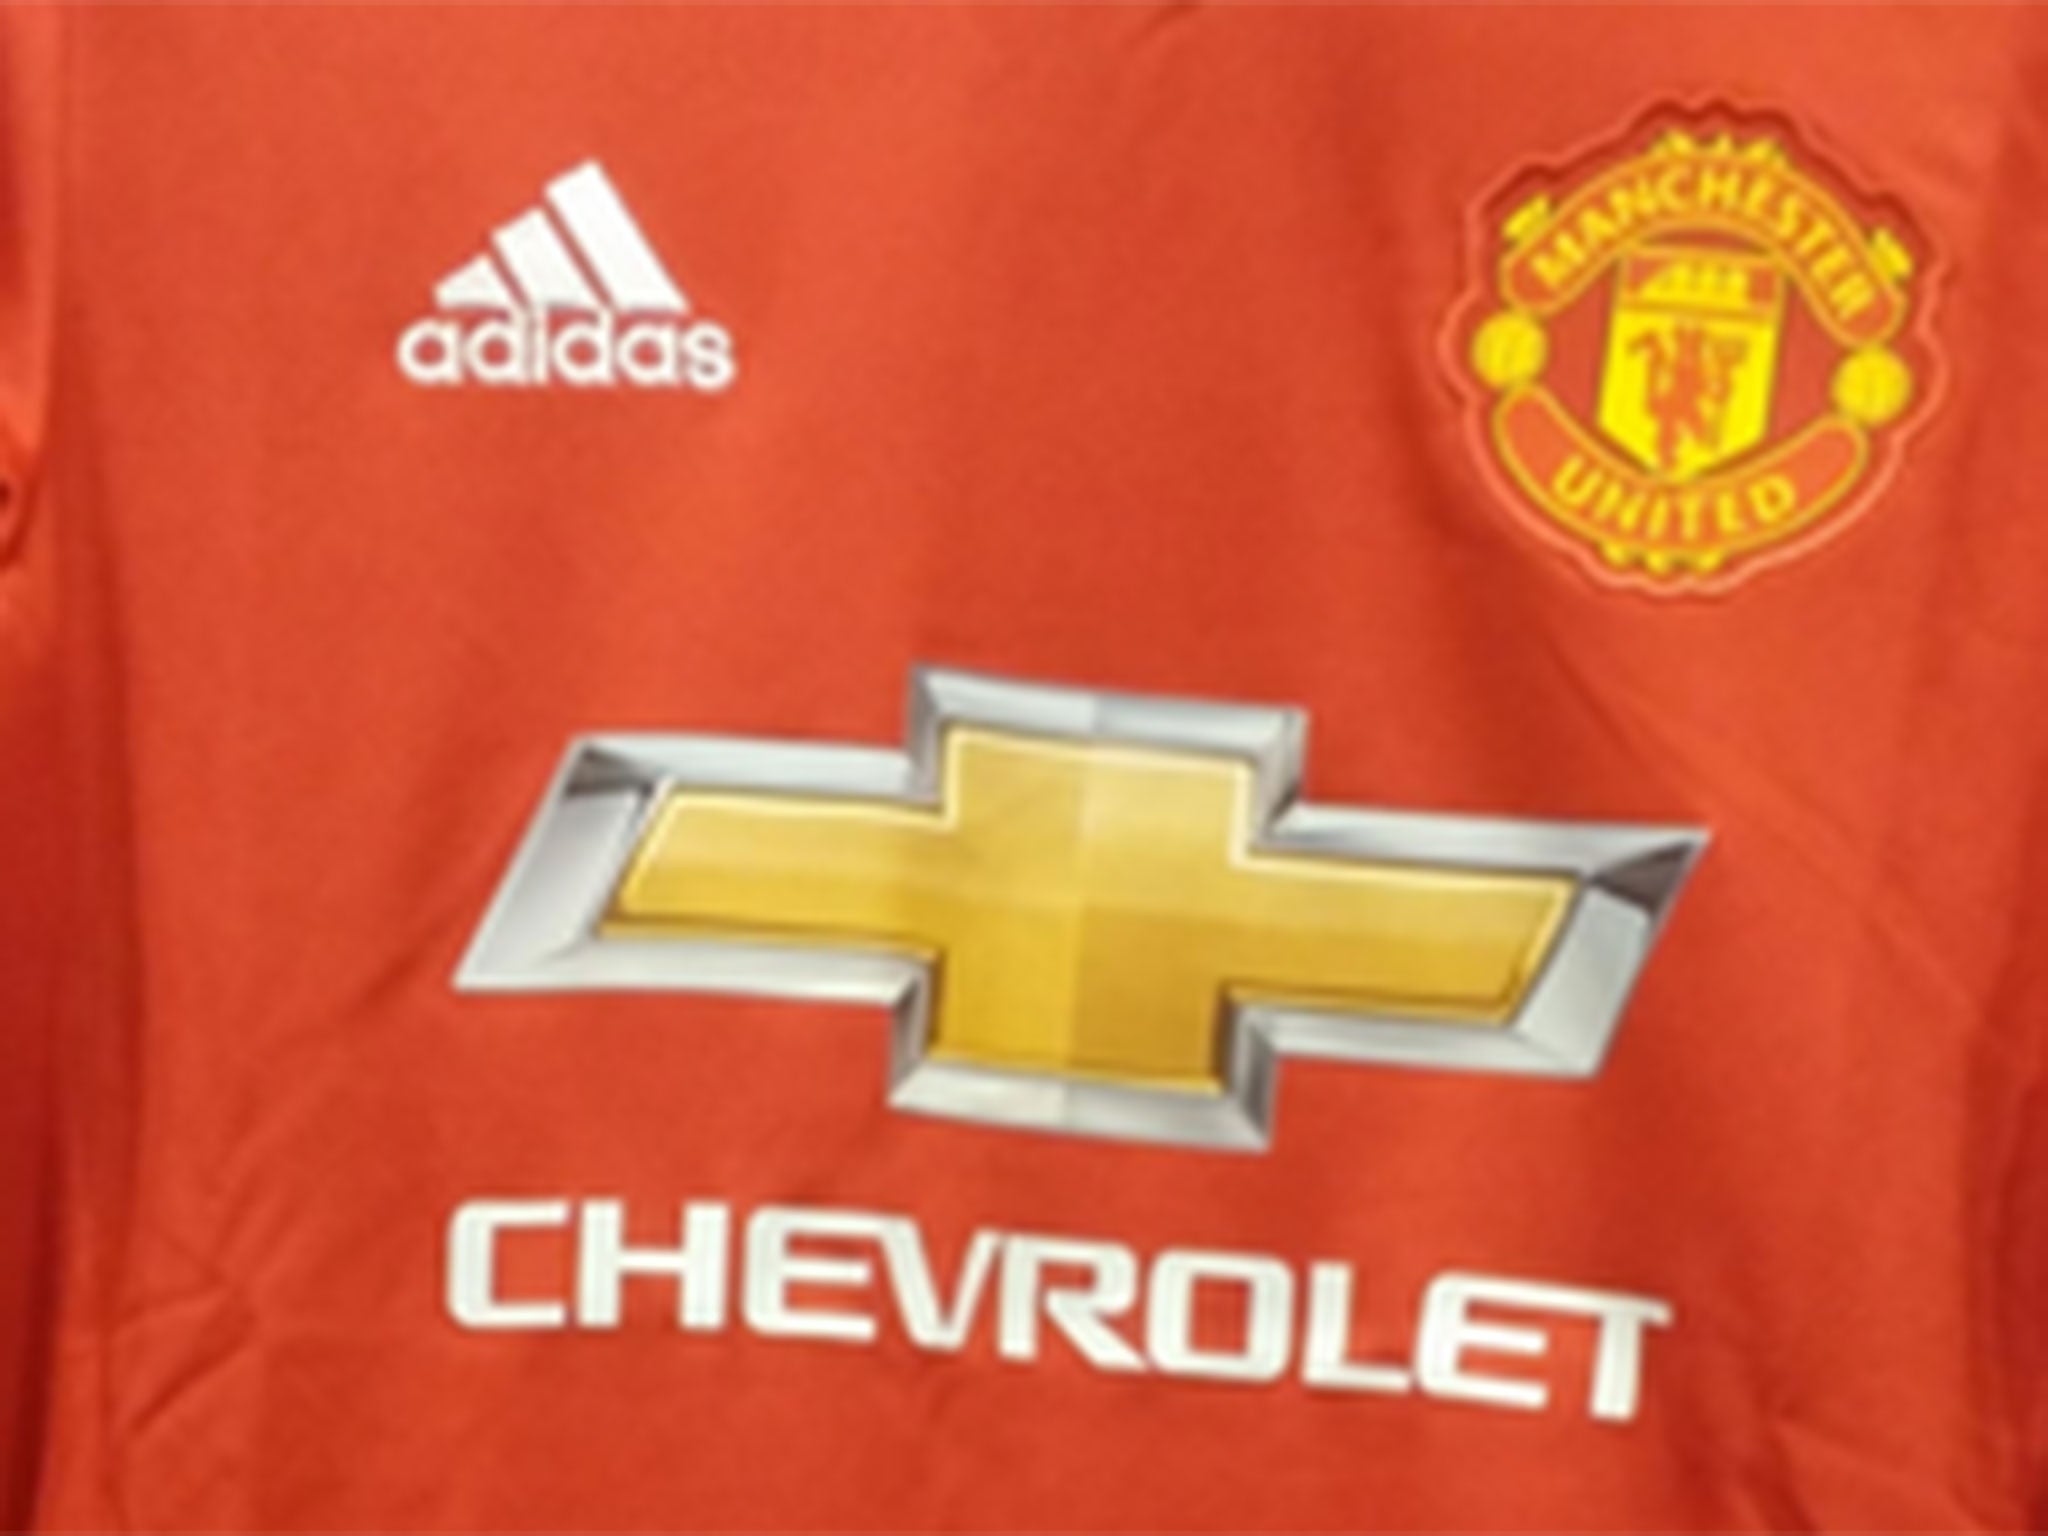 Images of Manchester United's new kit, put on sale accidentally in the US